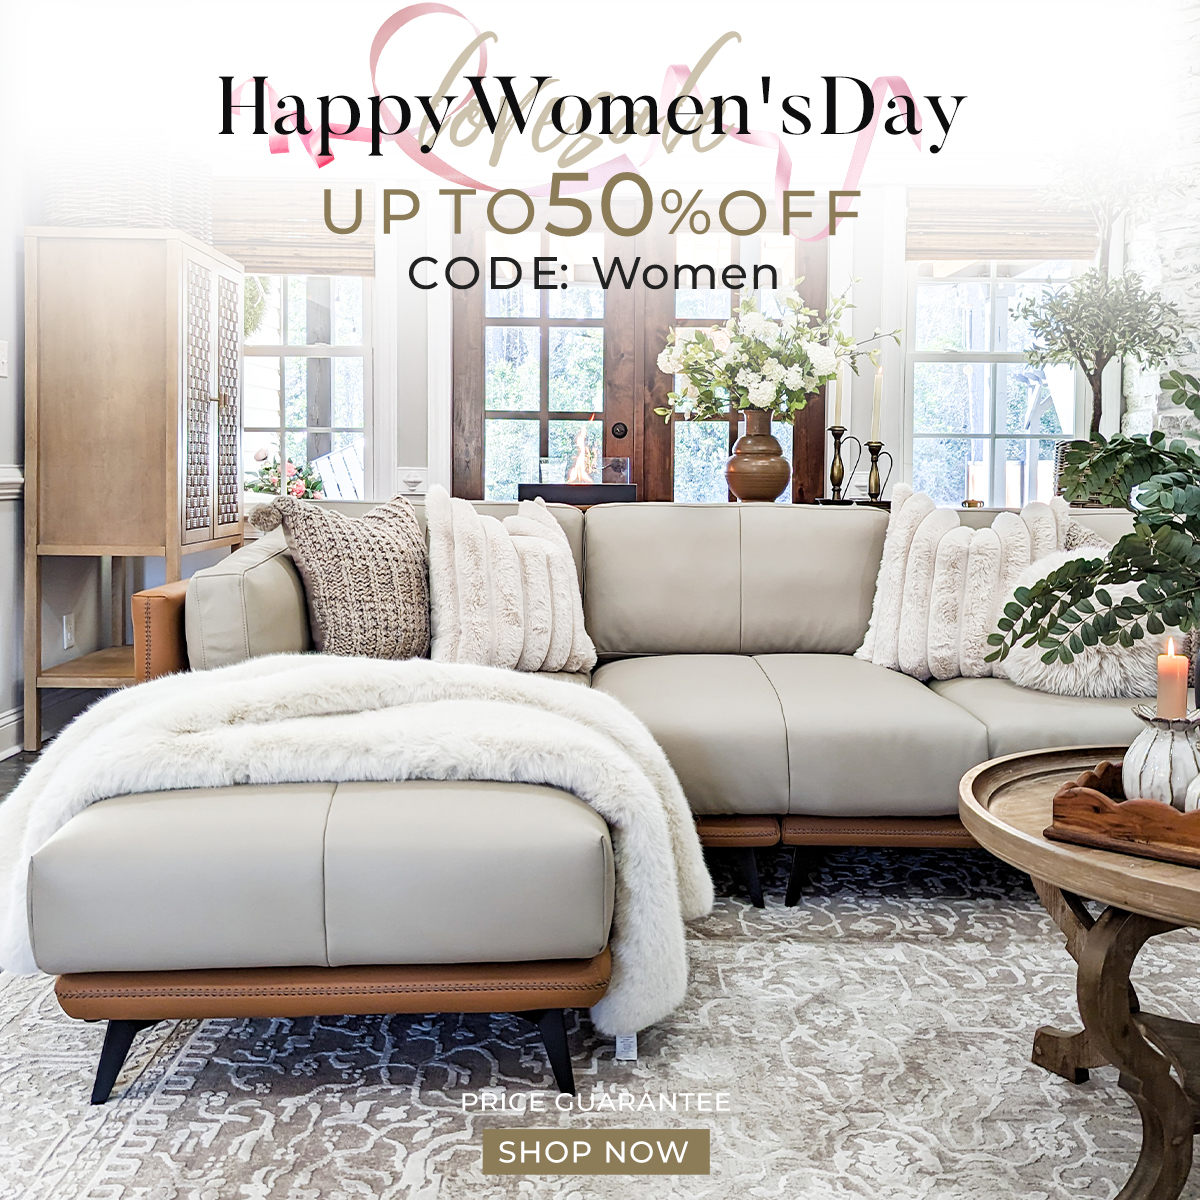 ✨ Latest News from 25Home:
💜 To celebrate the upcoming Women's Day, we've prepared exclusive promotions just for you!🤩 

#25home #25homefurniture #furnitureshop #interiorfurniture #furnituredesigner #furnituredesign #InternationalWomensDay #PowerfulWomen #WomenVoices